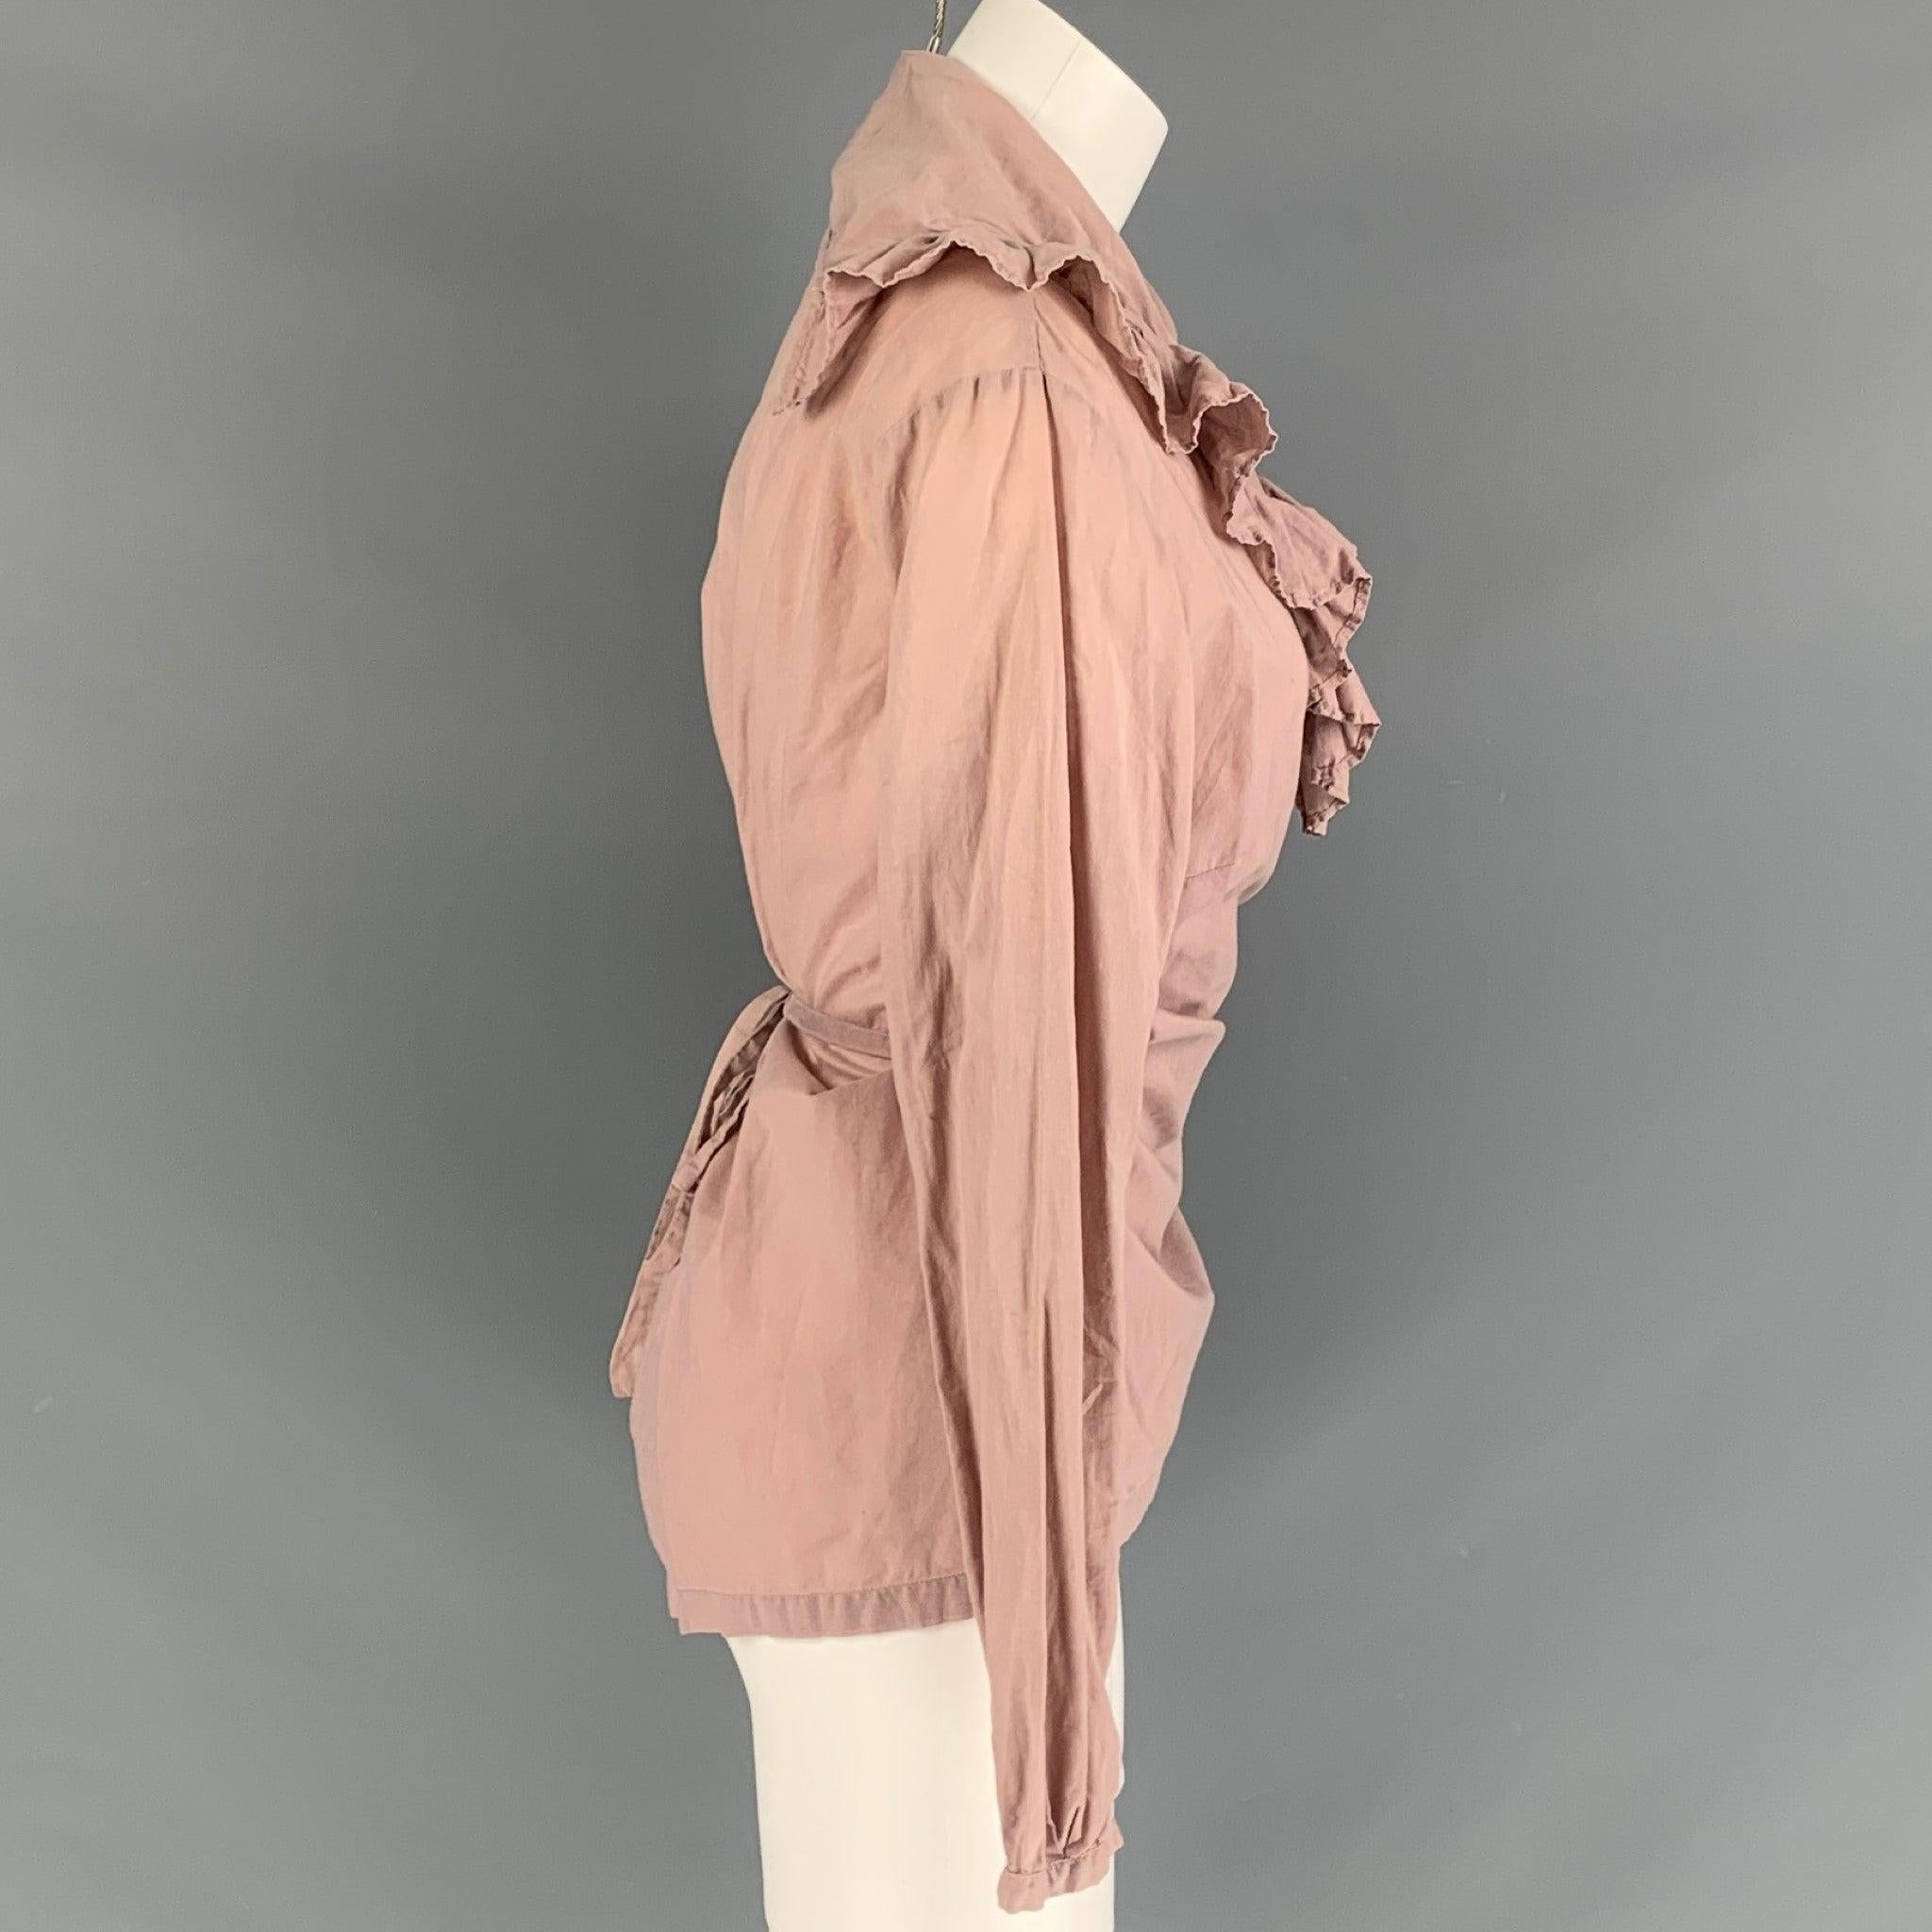 DRIES VAN NOTEN long sleeves blouse comes in a dust pink fabric featuring v-neck, ruffled detail at the collar and wrap up style. Made in Belgium.Excellent Pre-Owned Condition. Fabric tags removed. 

Marked:   42 

Measurements: 
 
Shoulder: 17